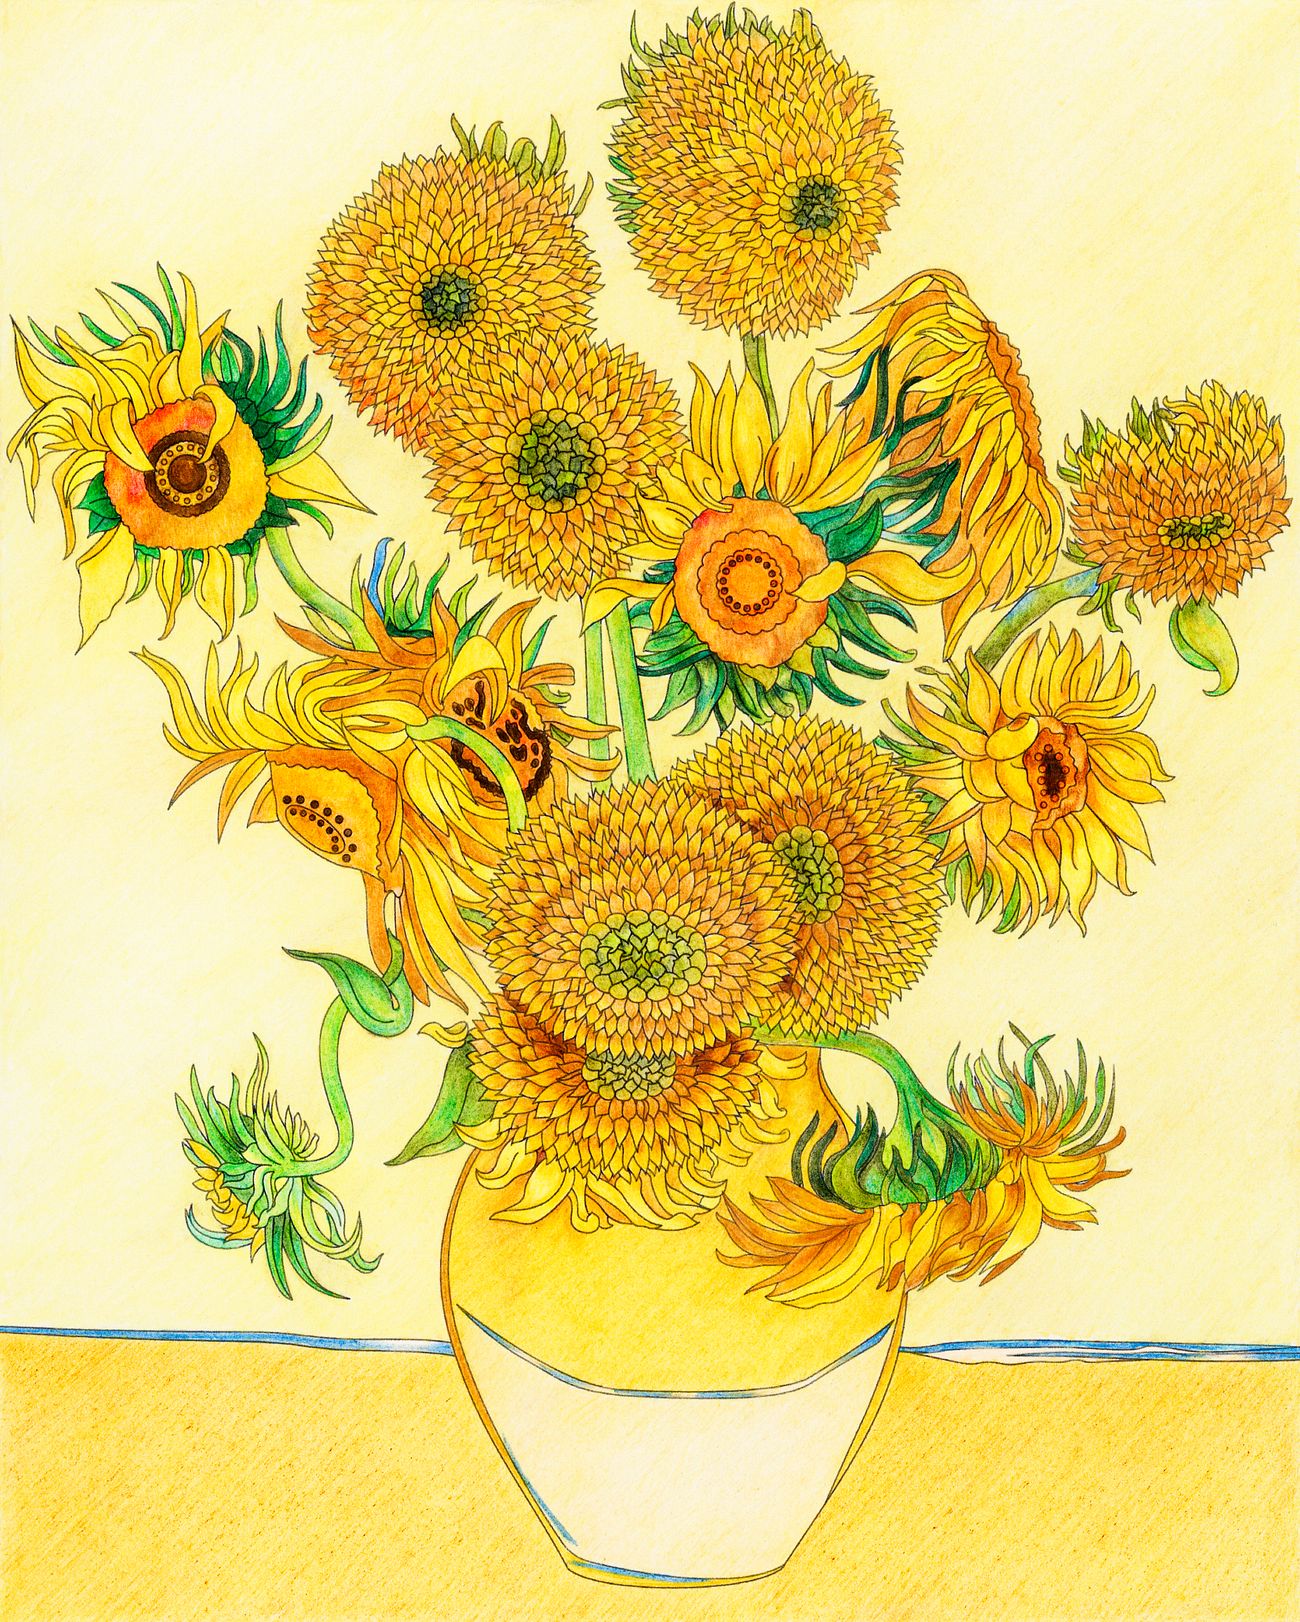 sunflowers-1889-by-vincent-van-gogh-adult-coloring-page-free